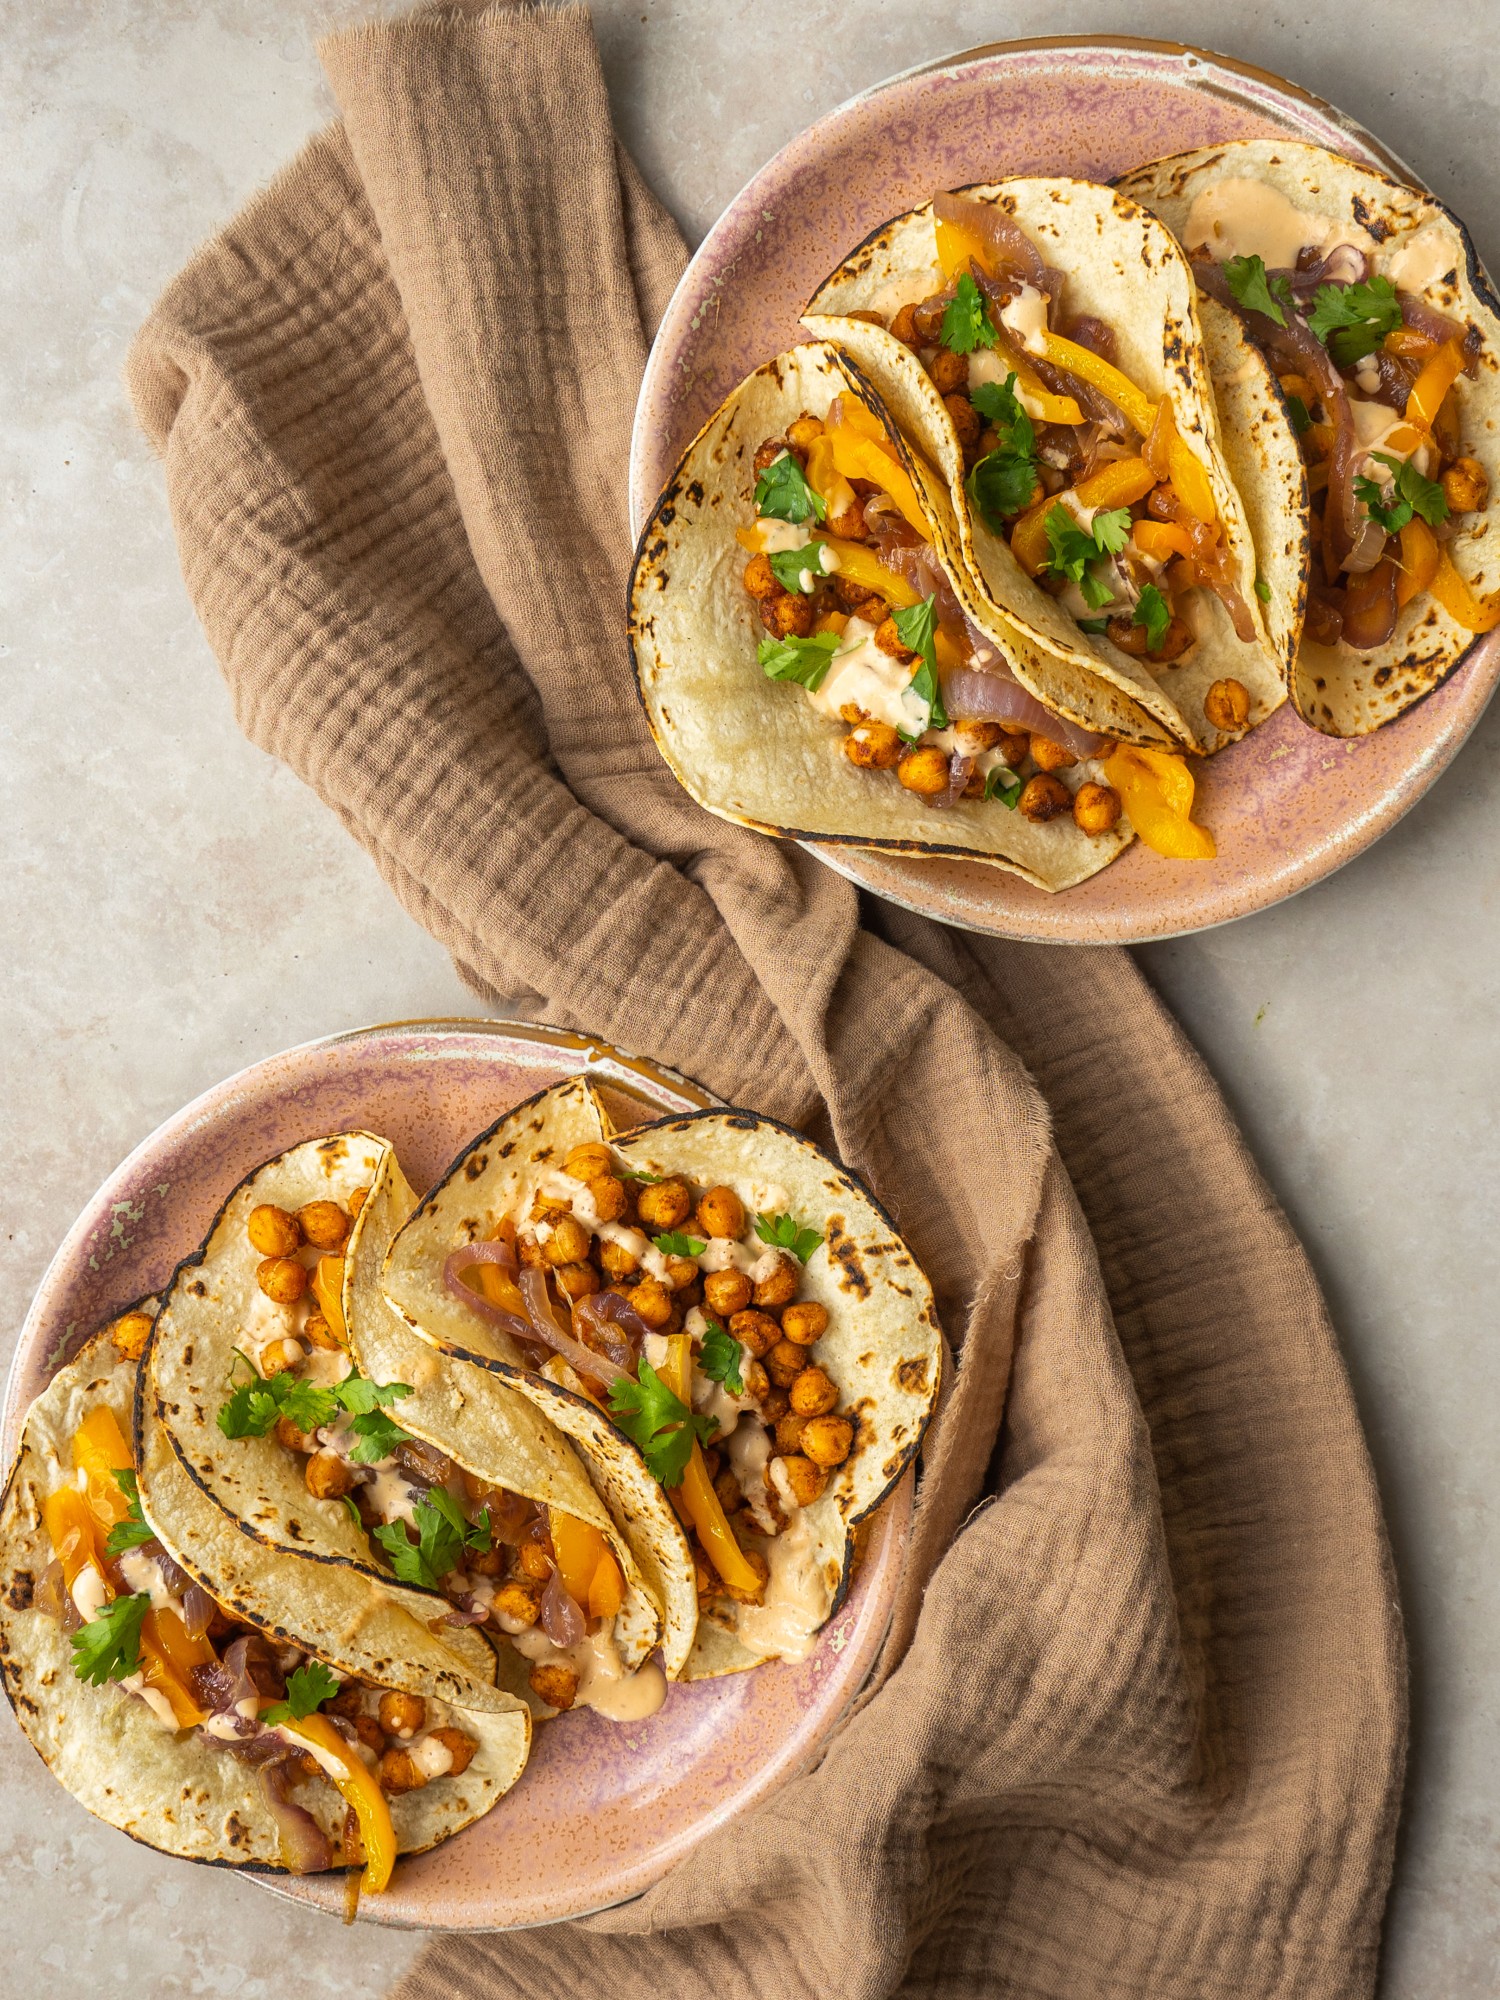 Chickpea tacos served with chipotle crema and fresh cilantro